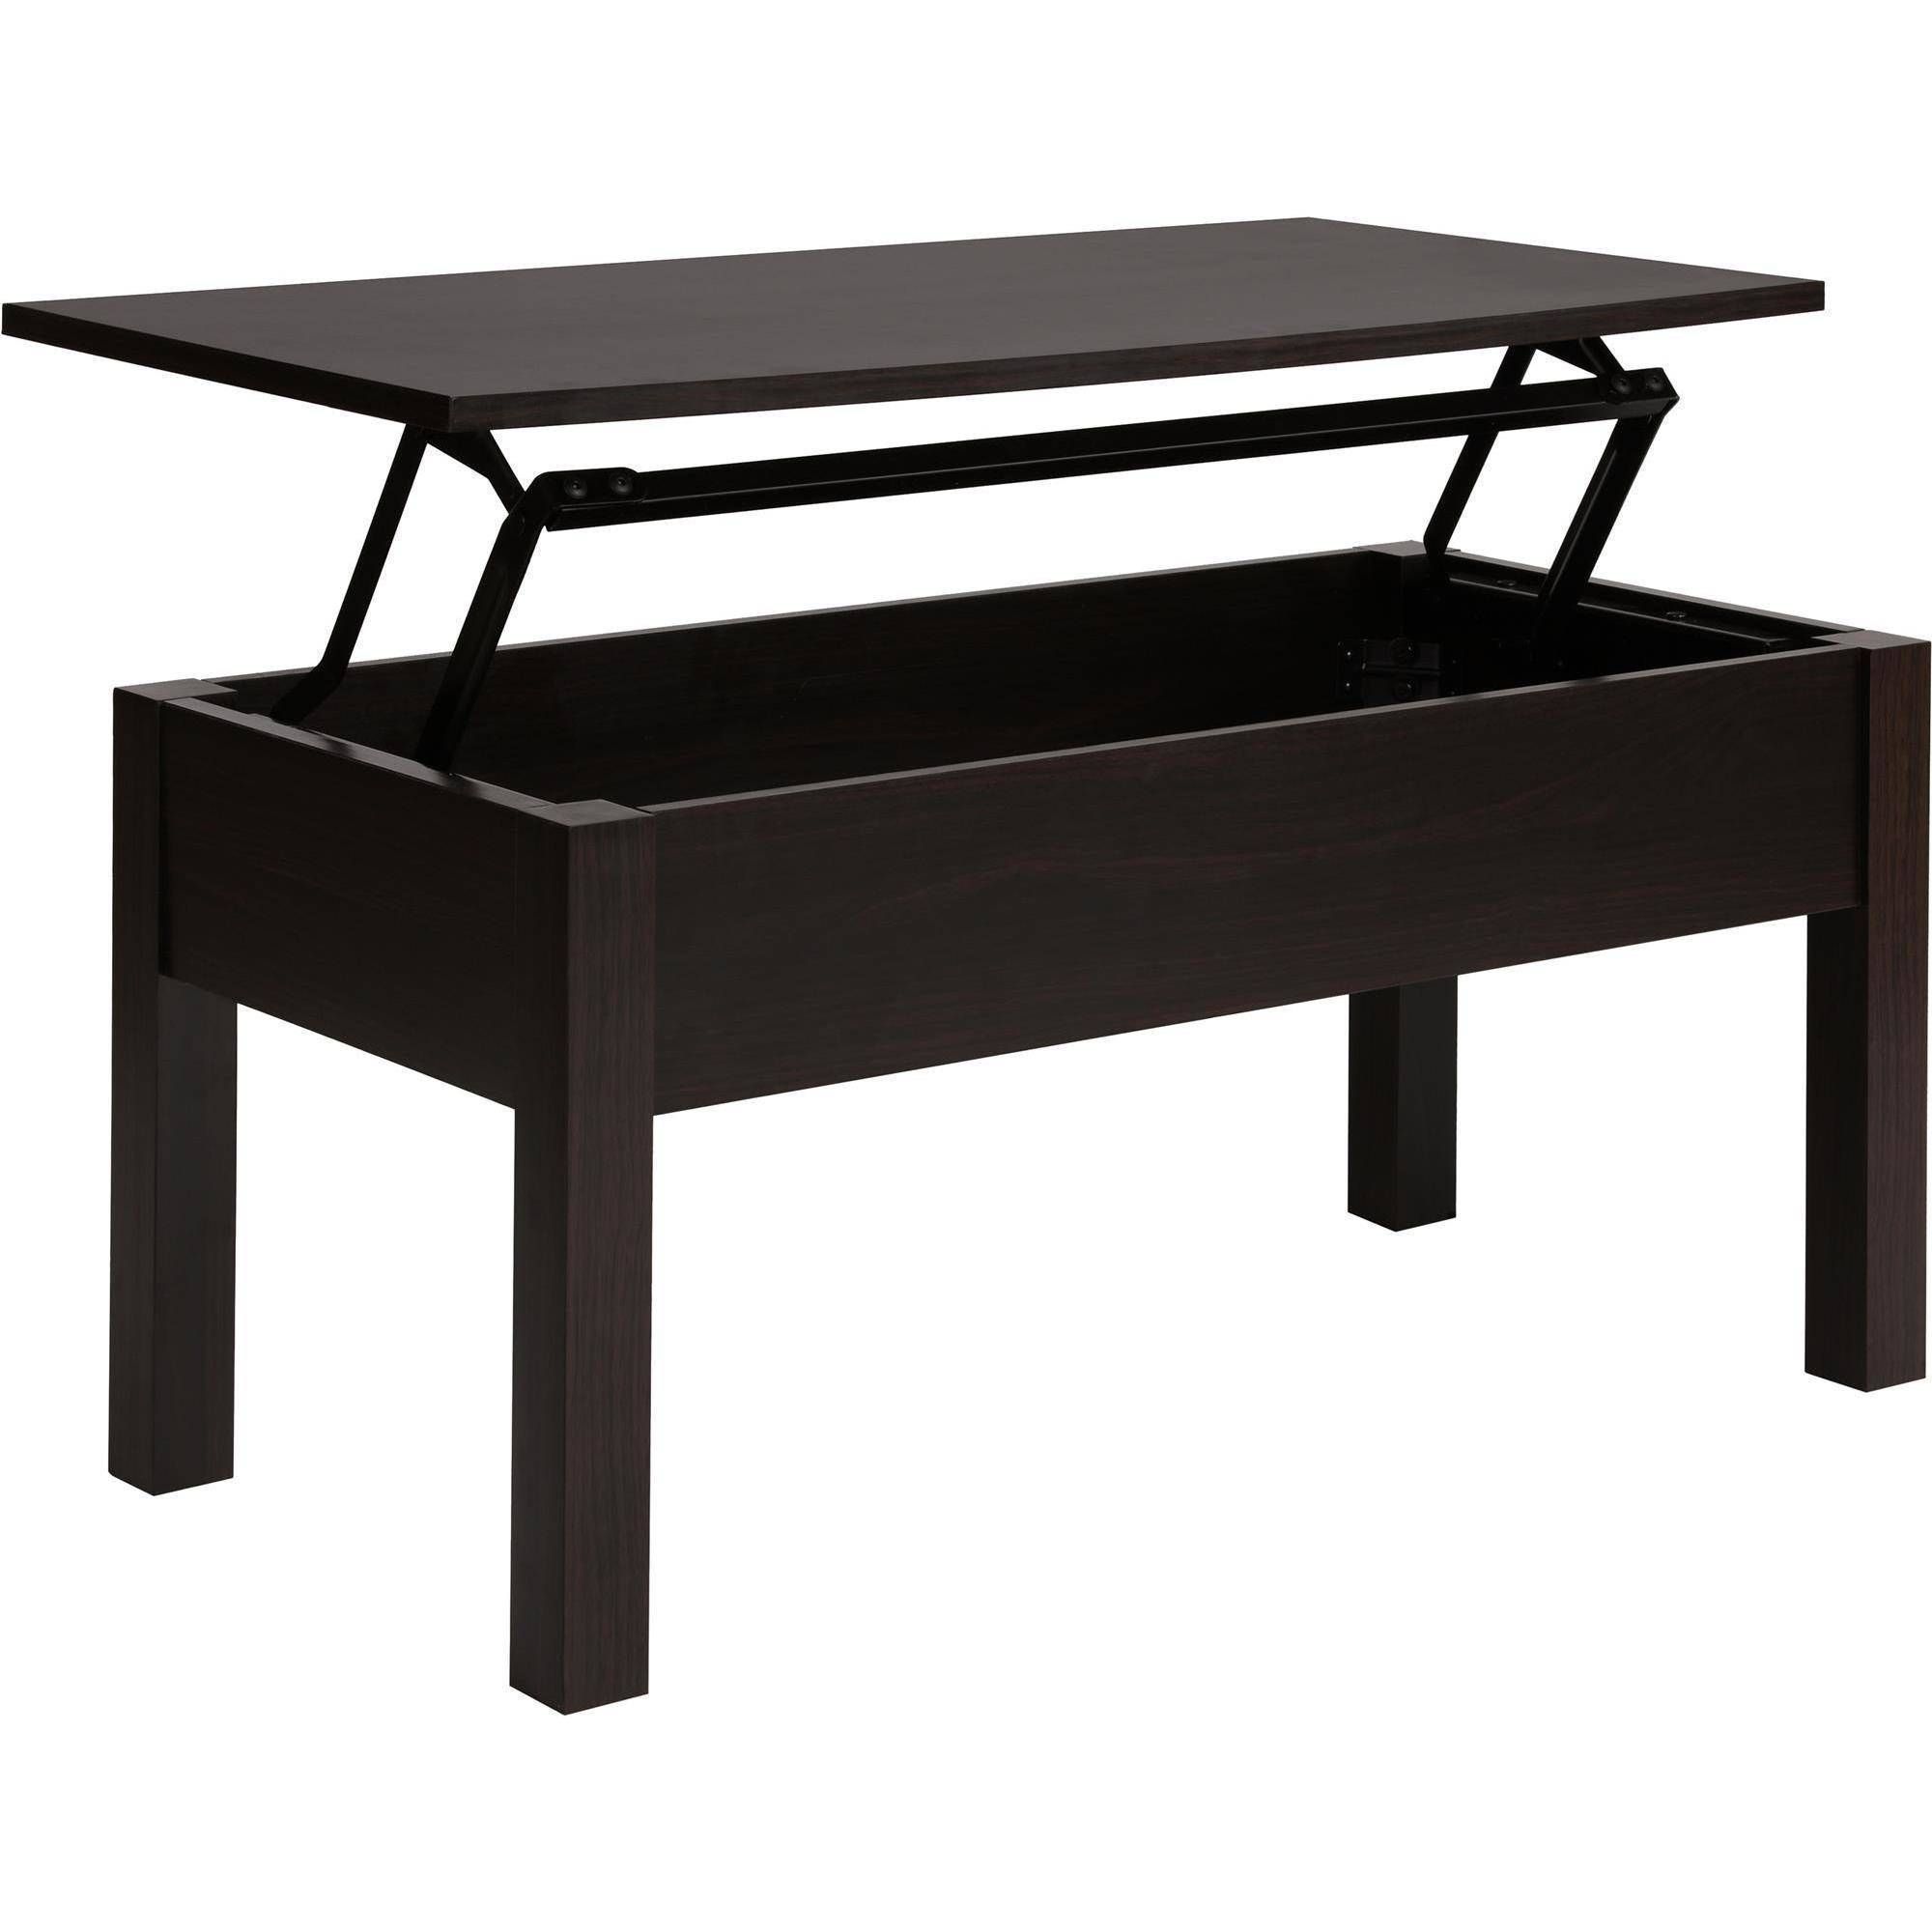 Mainstays Lift Top Coffee Table, Multiple Colors – Walmart Intended For Coffee Tables With Lifting Top (View 3 of 30)